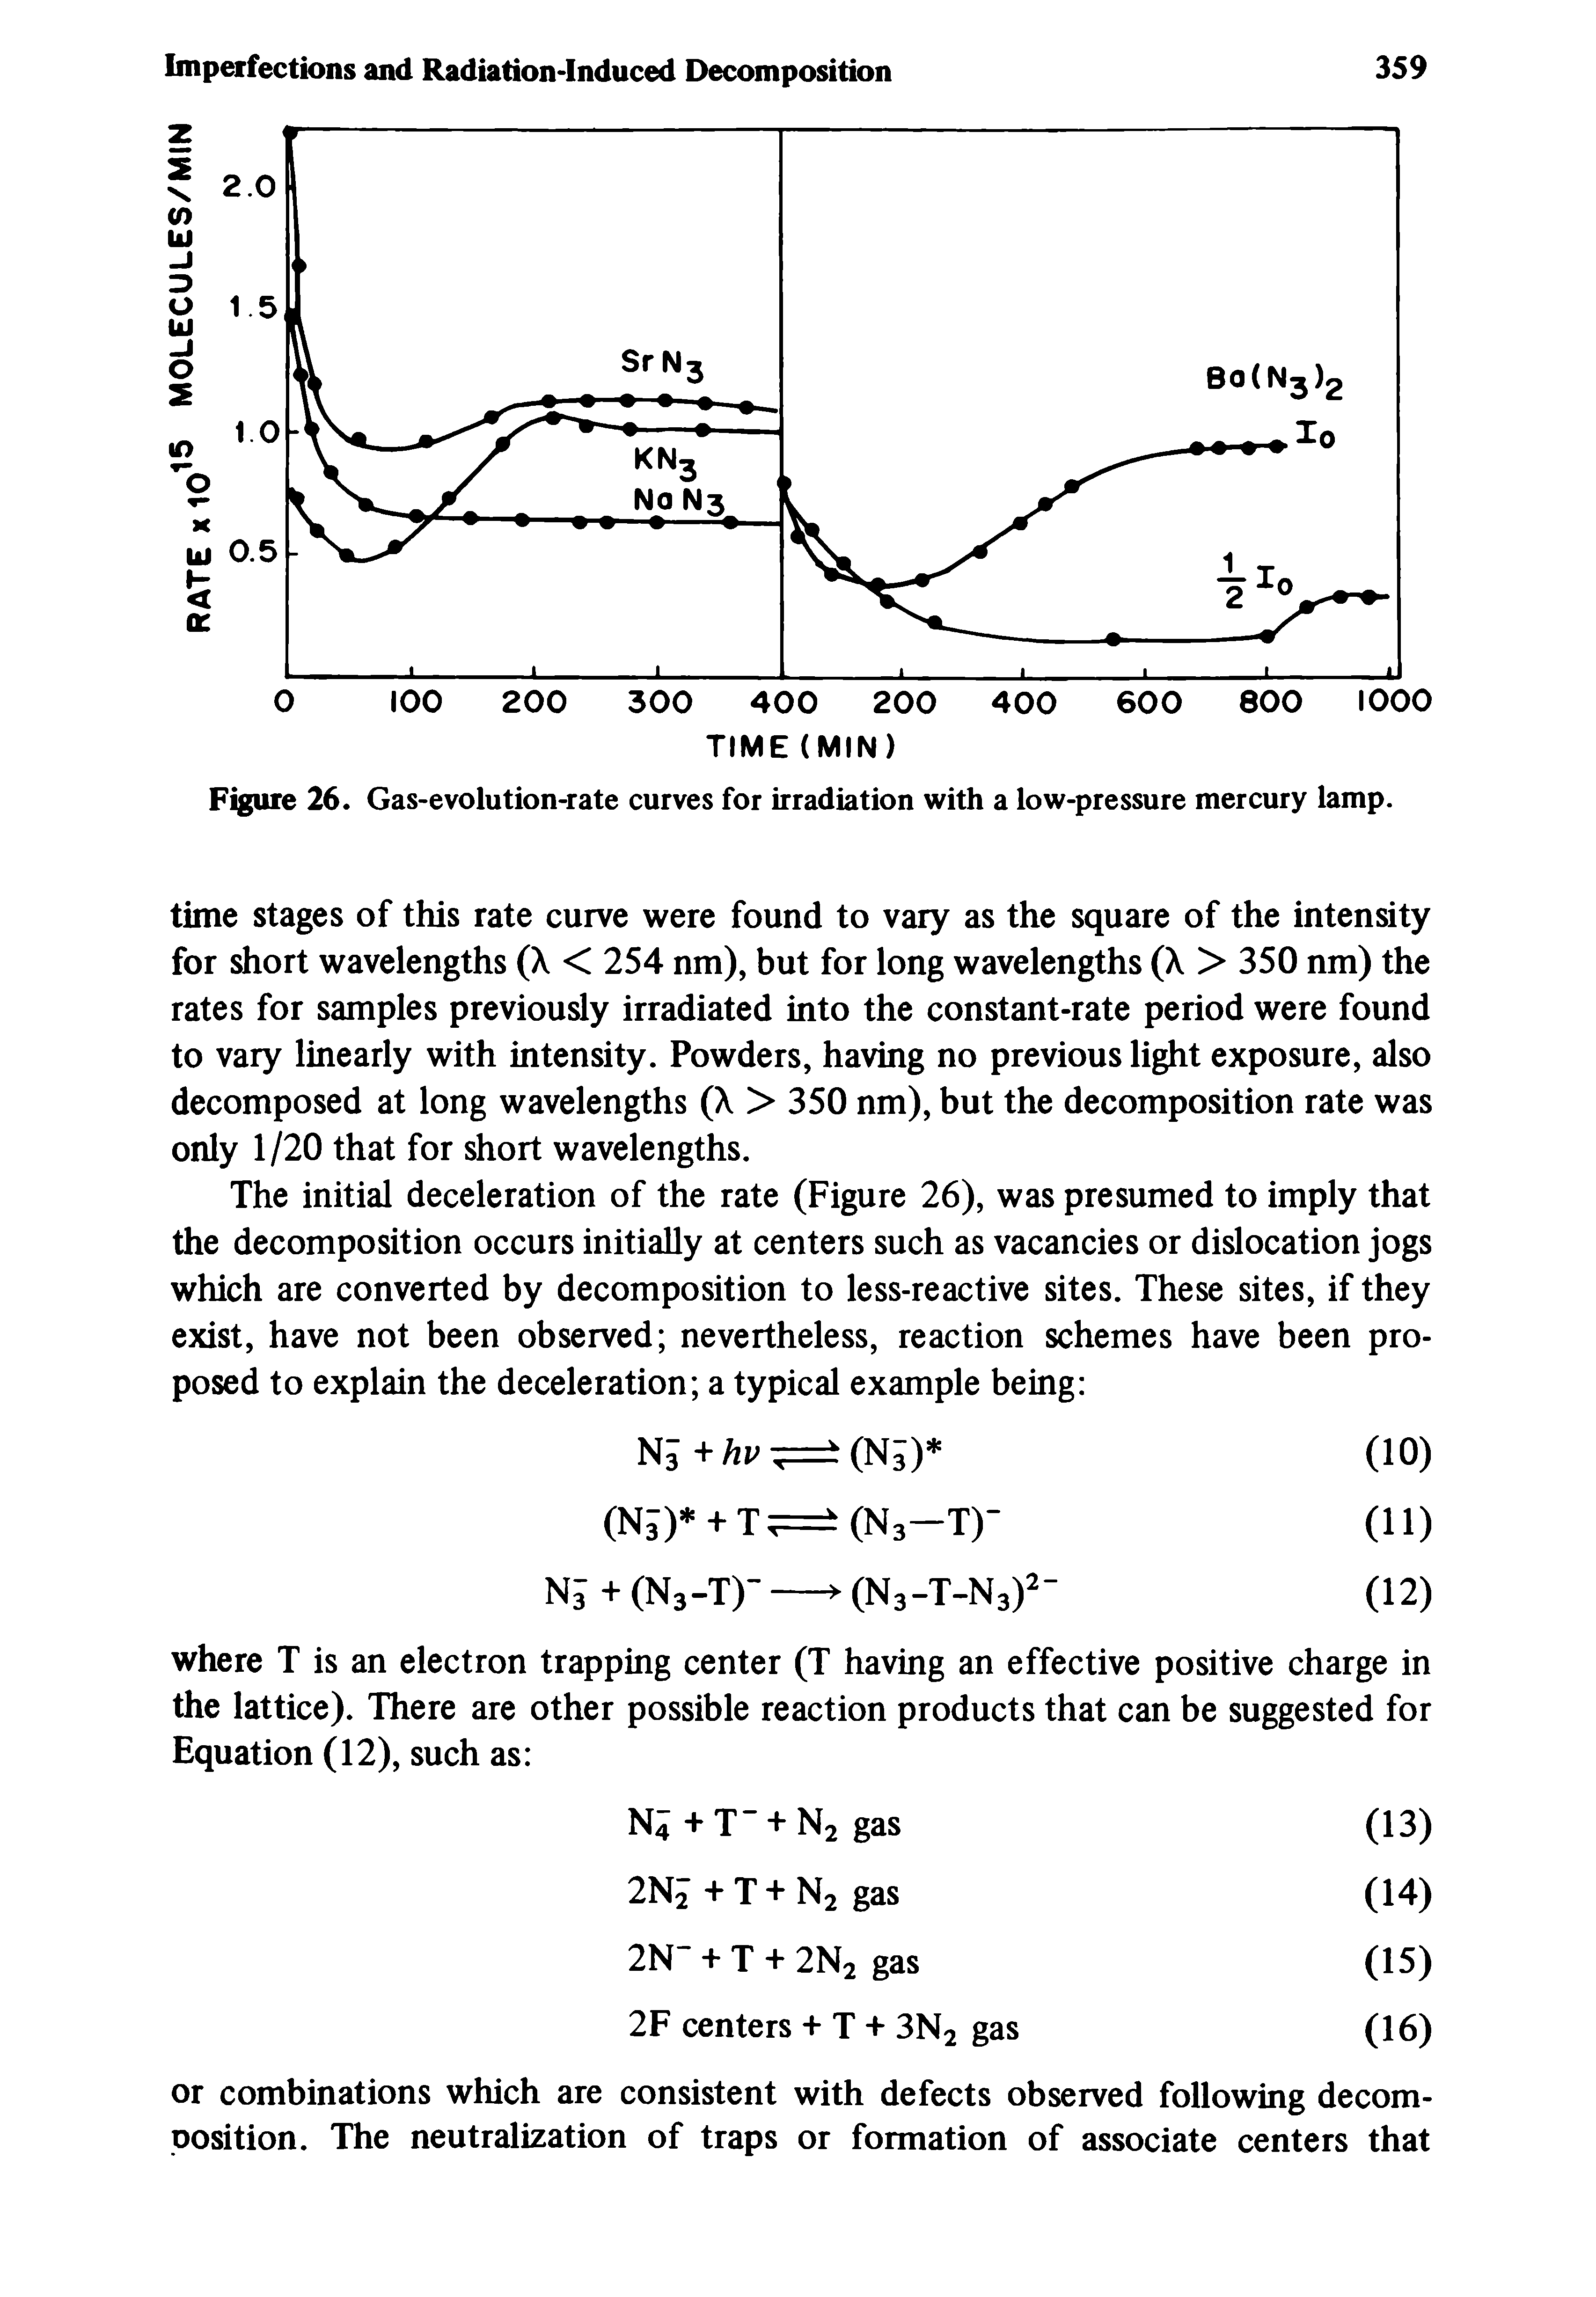 Figure 26. Gas-evolution-rate curves for irradiation with a low-pressure mercury lamp.